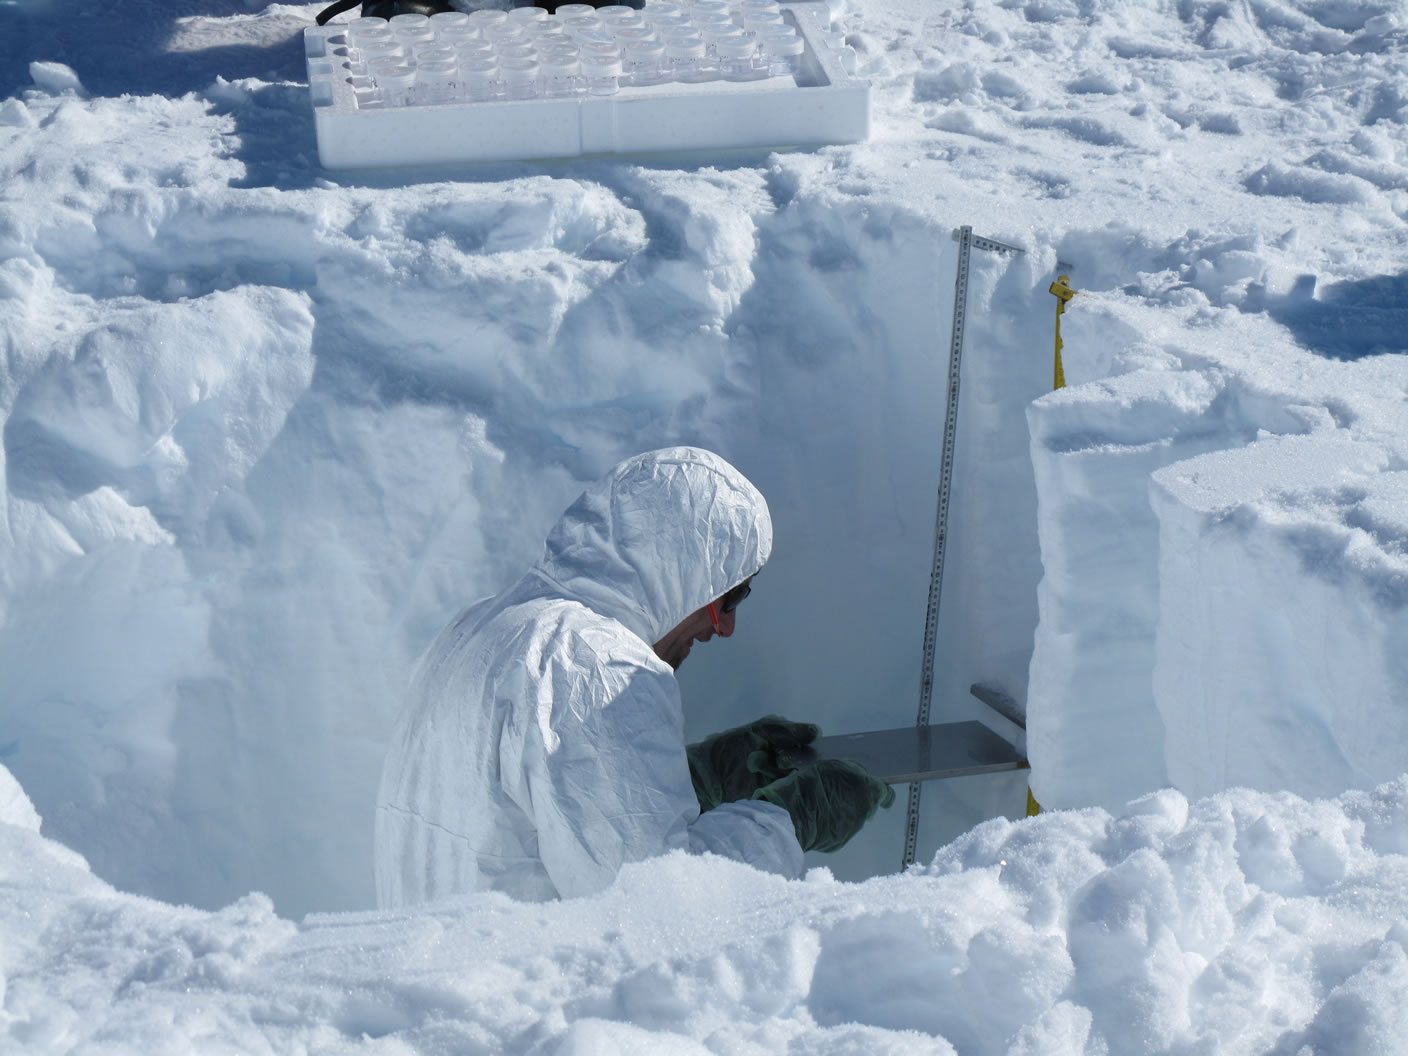 Enlarged view: Data collection in Greenland